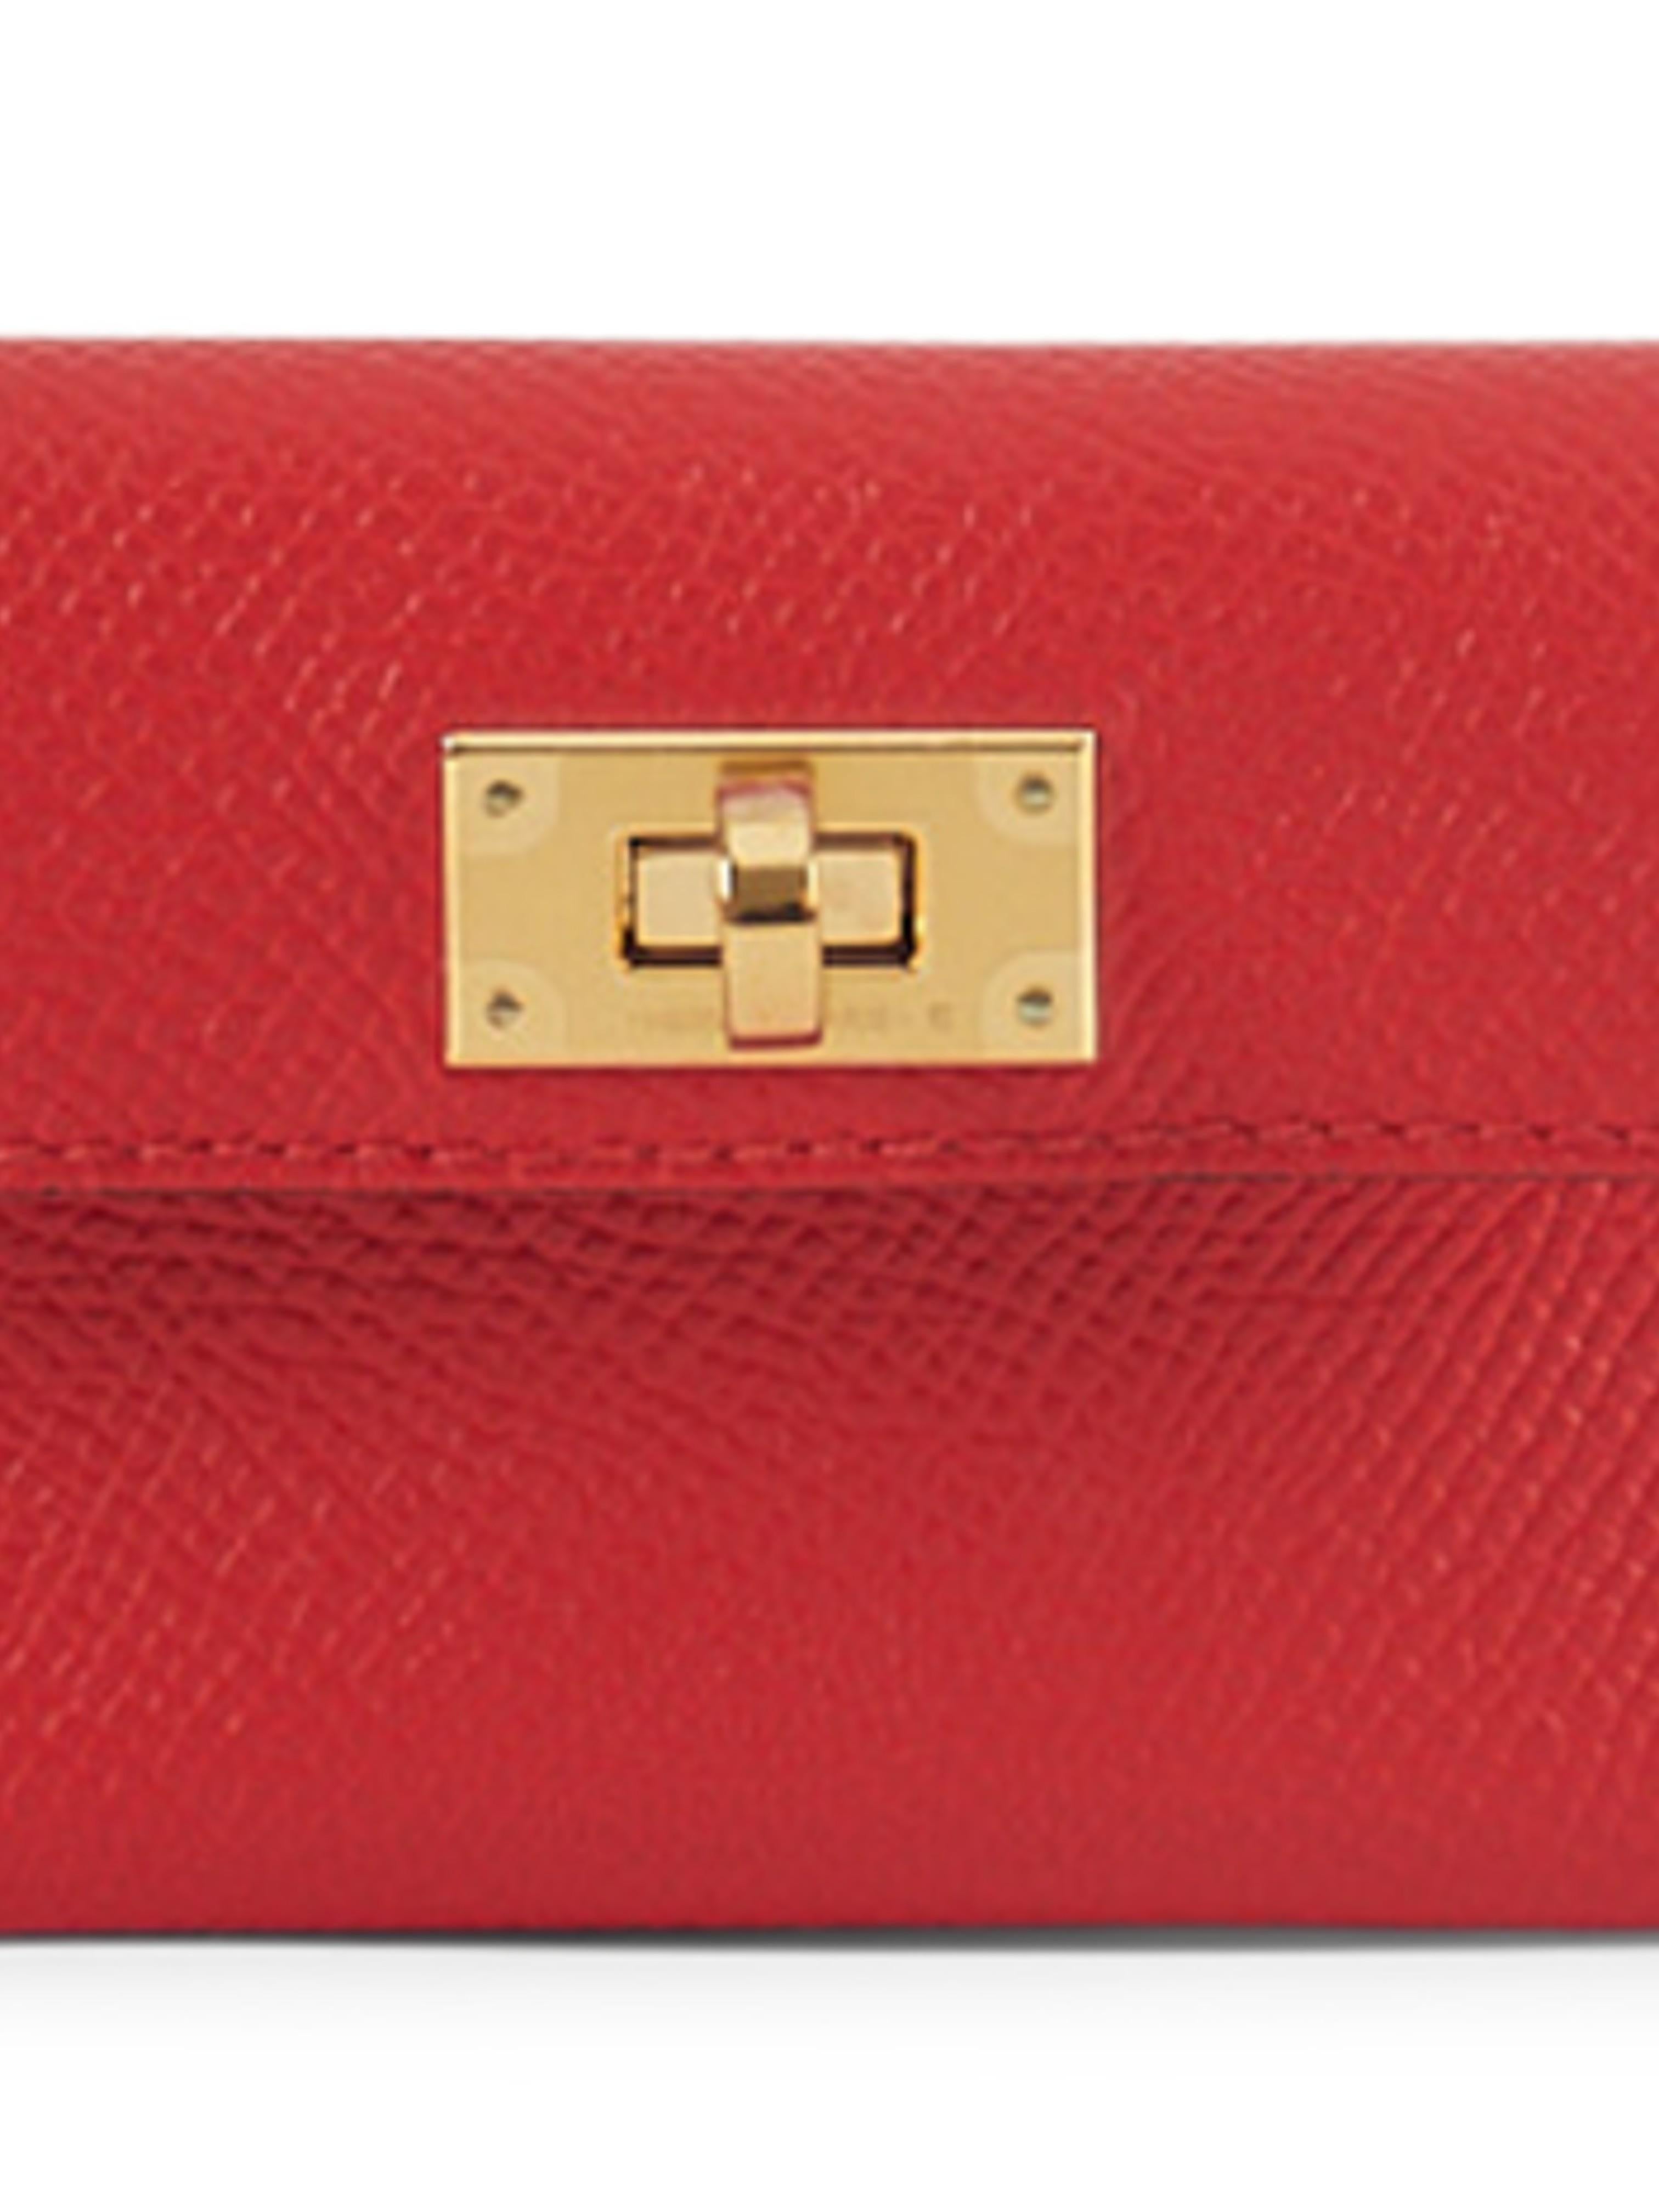 HERMÈS KELLY POCKET STRAP 105CM ROUGE CASAQUE & TOMATE Epsom & Swift GHW In Excellent Condition For Sale In London, GB